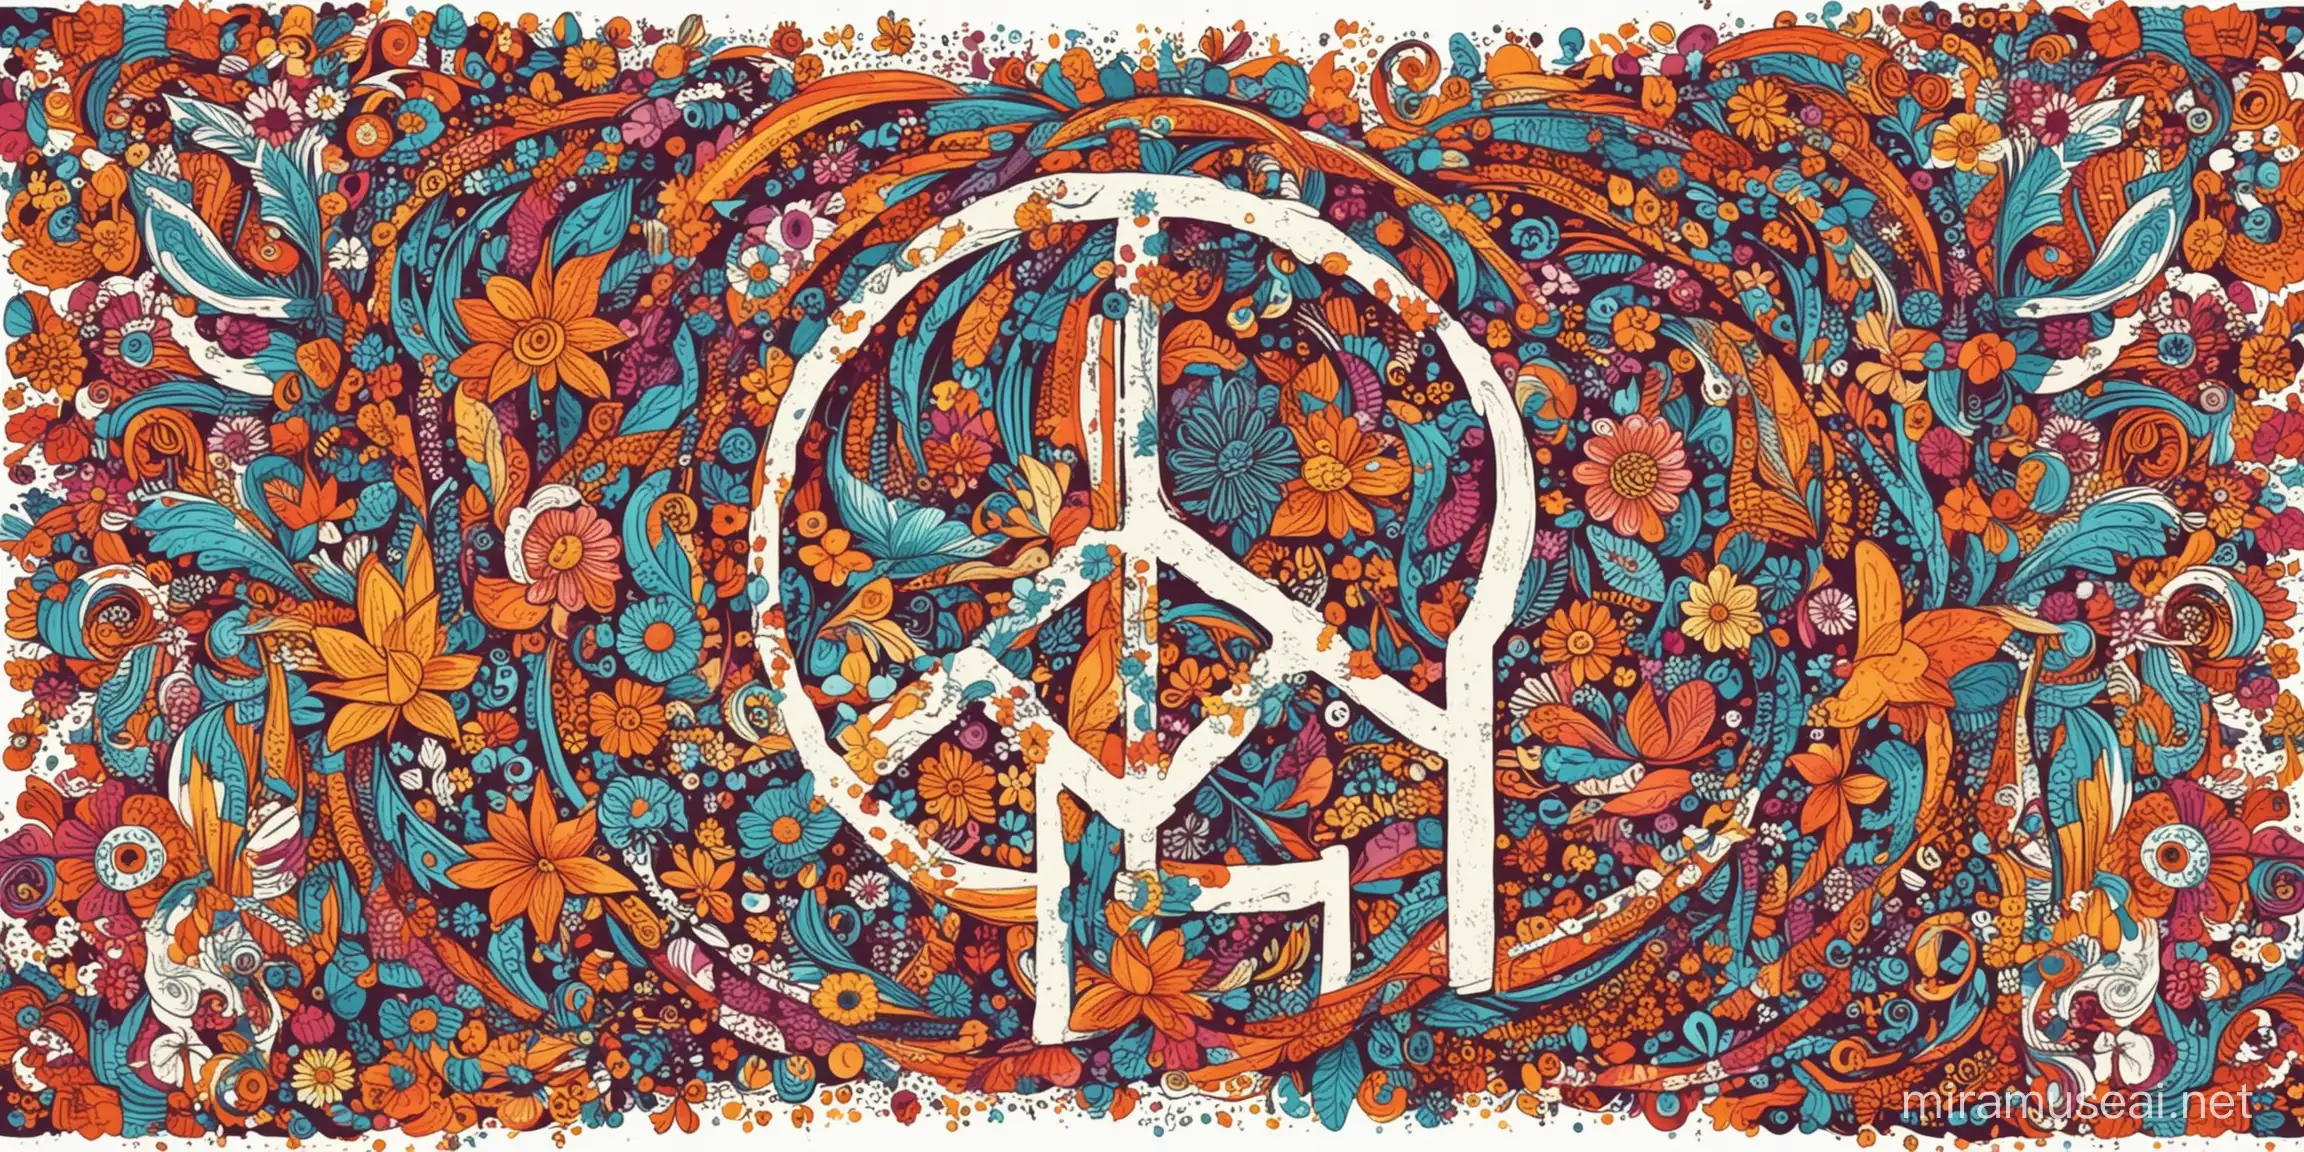 peace sign, flowers, and swirling patterns. psychedelic retro-style illustration, tshirt design vector, white background v
5.1 raw style